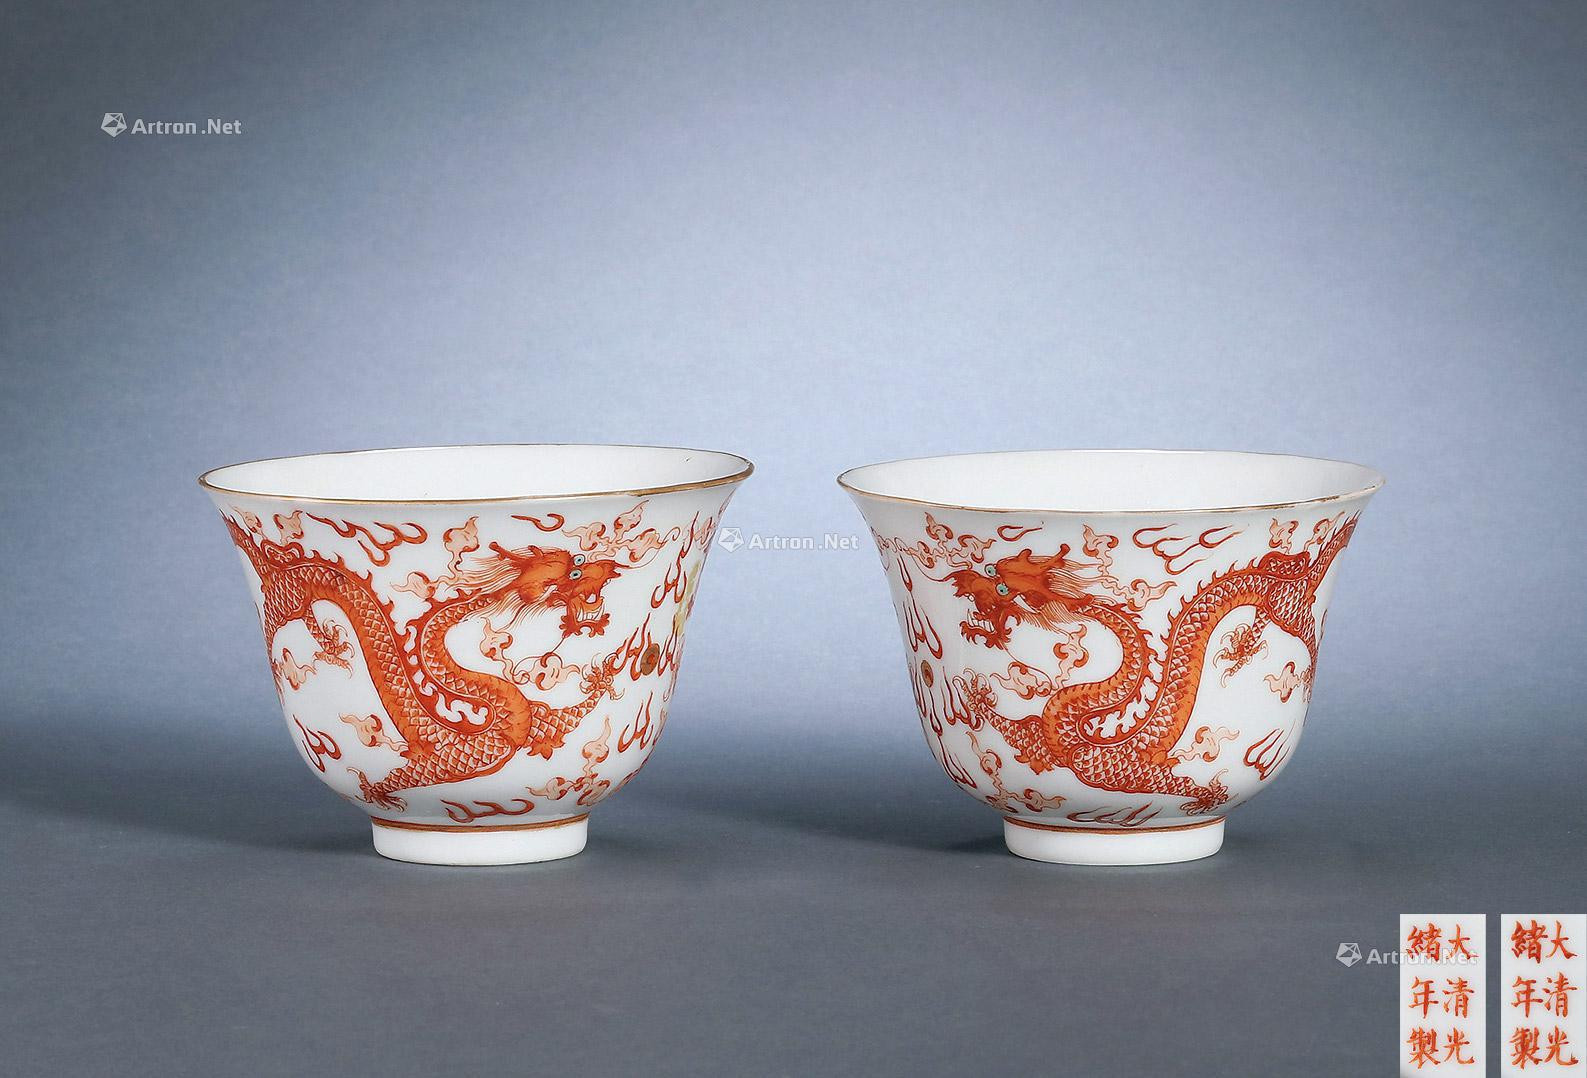 A PAIR OF IRON-RED DRAGON BELL-TYPE CUPS